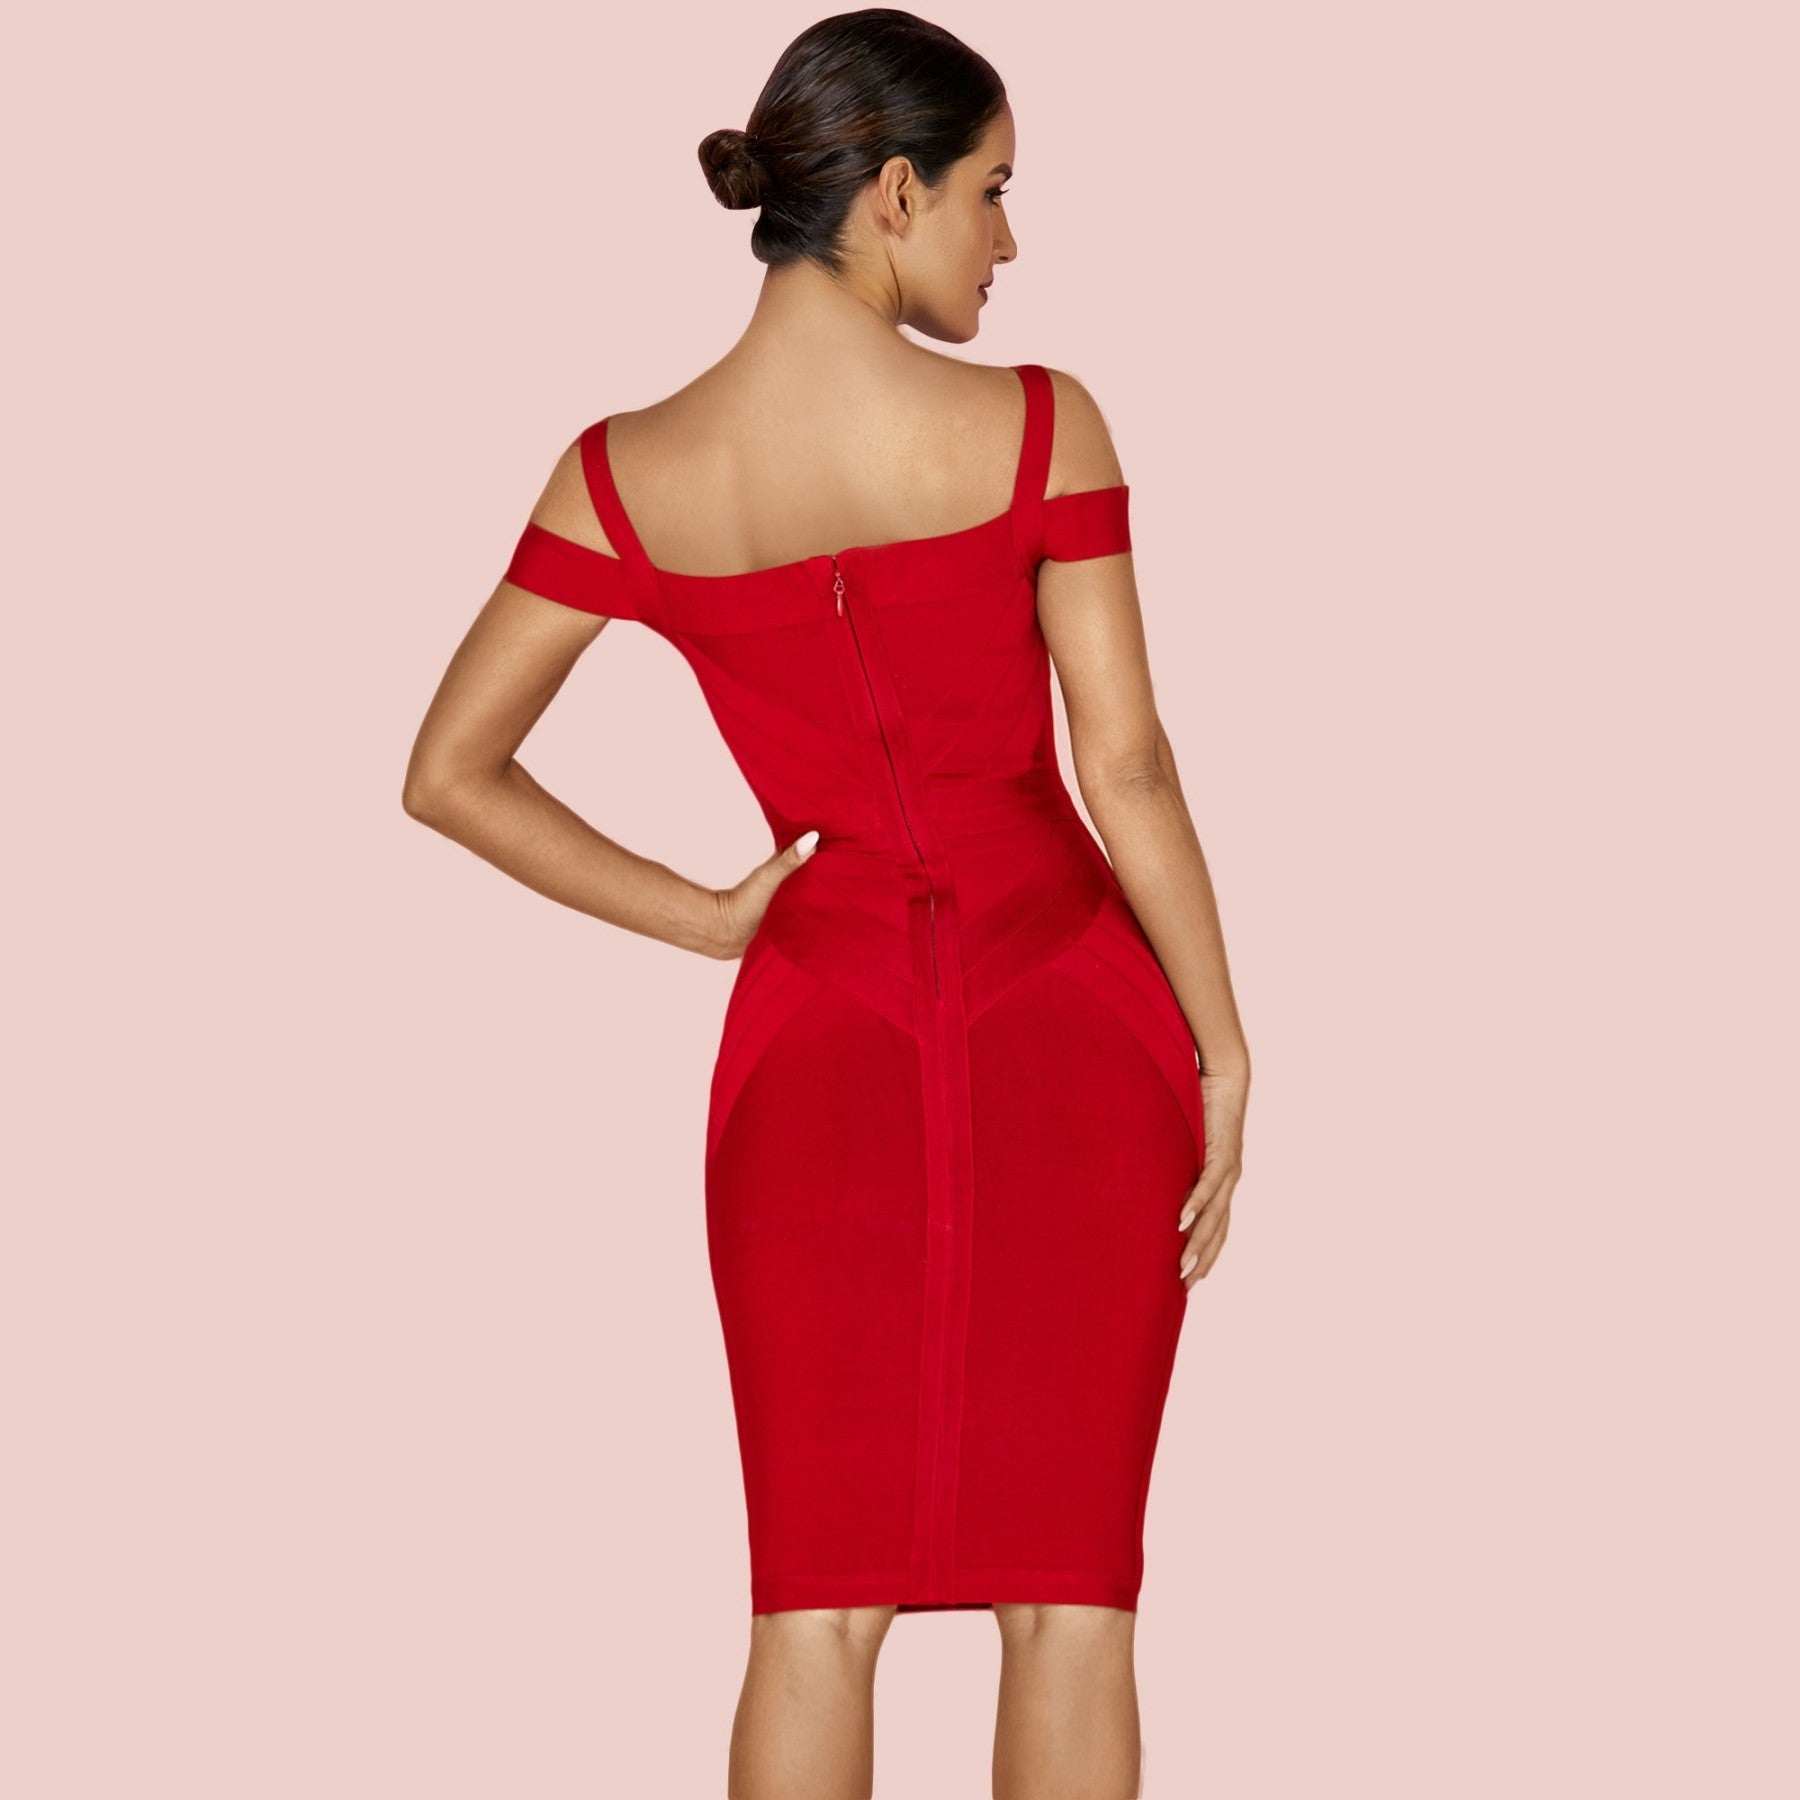 Strappy Short Sleeve Striped Over Knee Bandage Dress PF19168 4 in wolddress